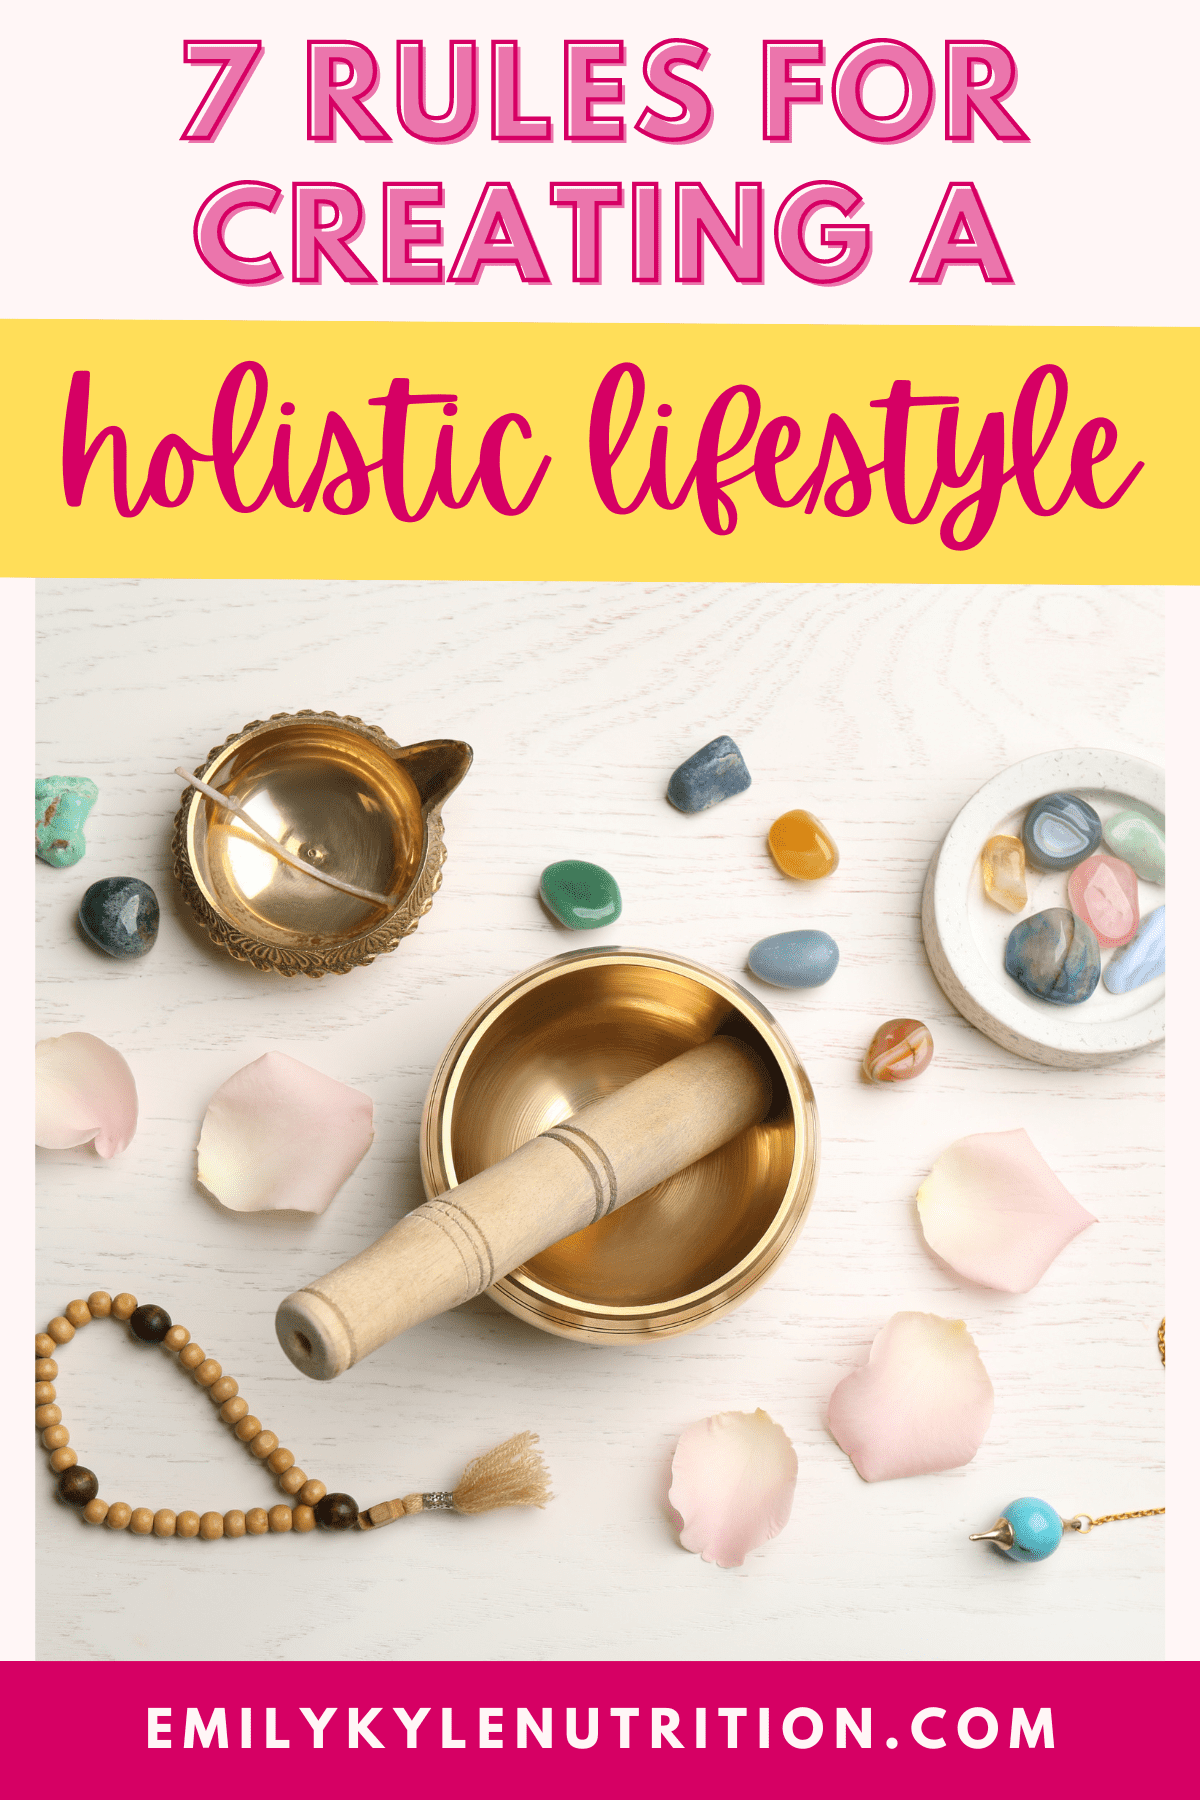 A picture of crystals and bowls with text that says 7 rules for creating a holistic lifestyle.